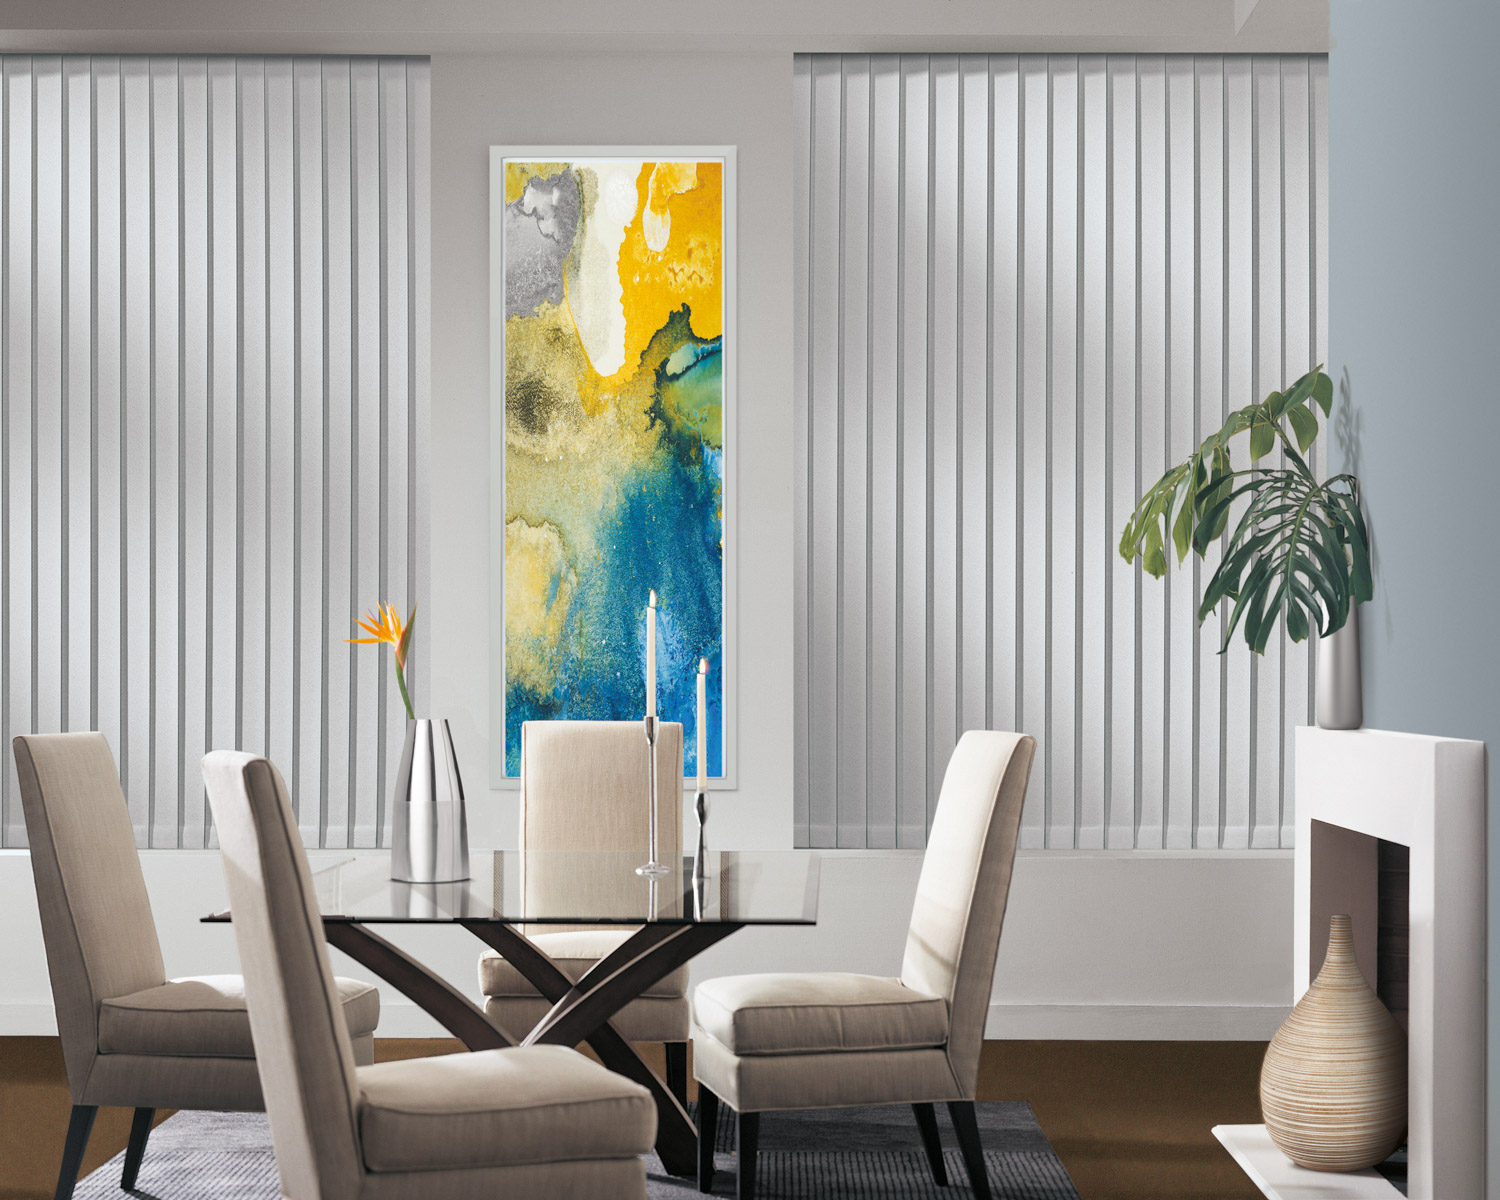 Stylish dining room decor with white walls, yellow artwork, and Hunter Douglas Somner® Vertical Blinds.